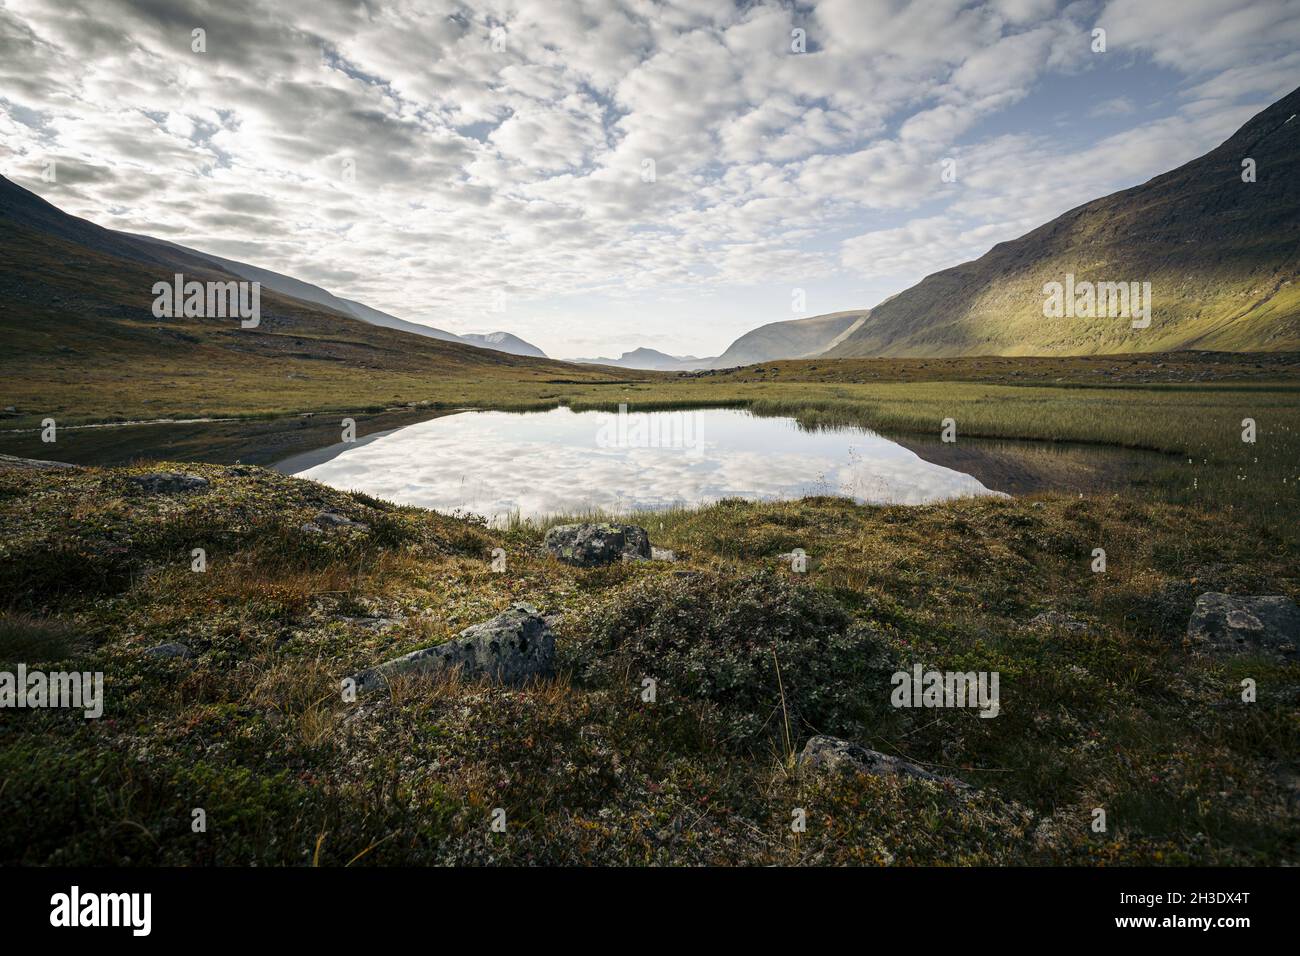 NIKKALUOKTA, SWEDEN - Sep 06, 2021: A view of  The Kungsleden Trail and its beautiful Mountain Lake in Nikkaluokta, Sweden Stock Photo